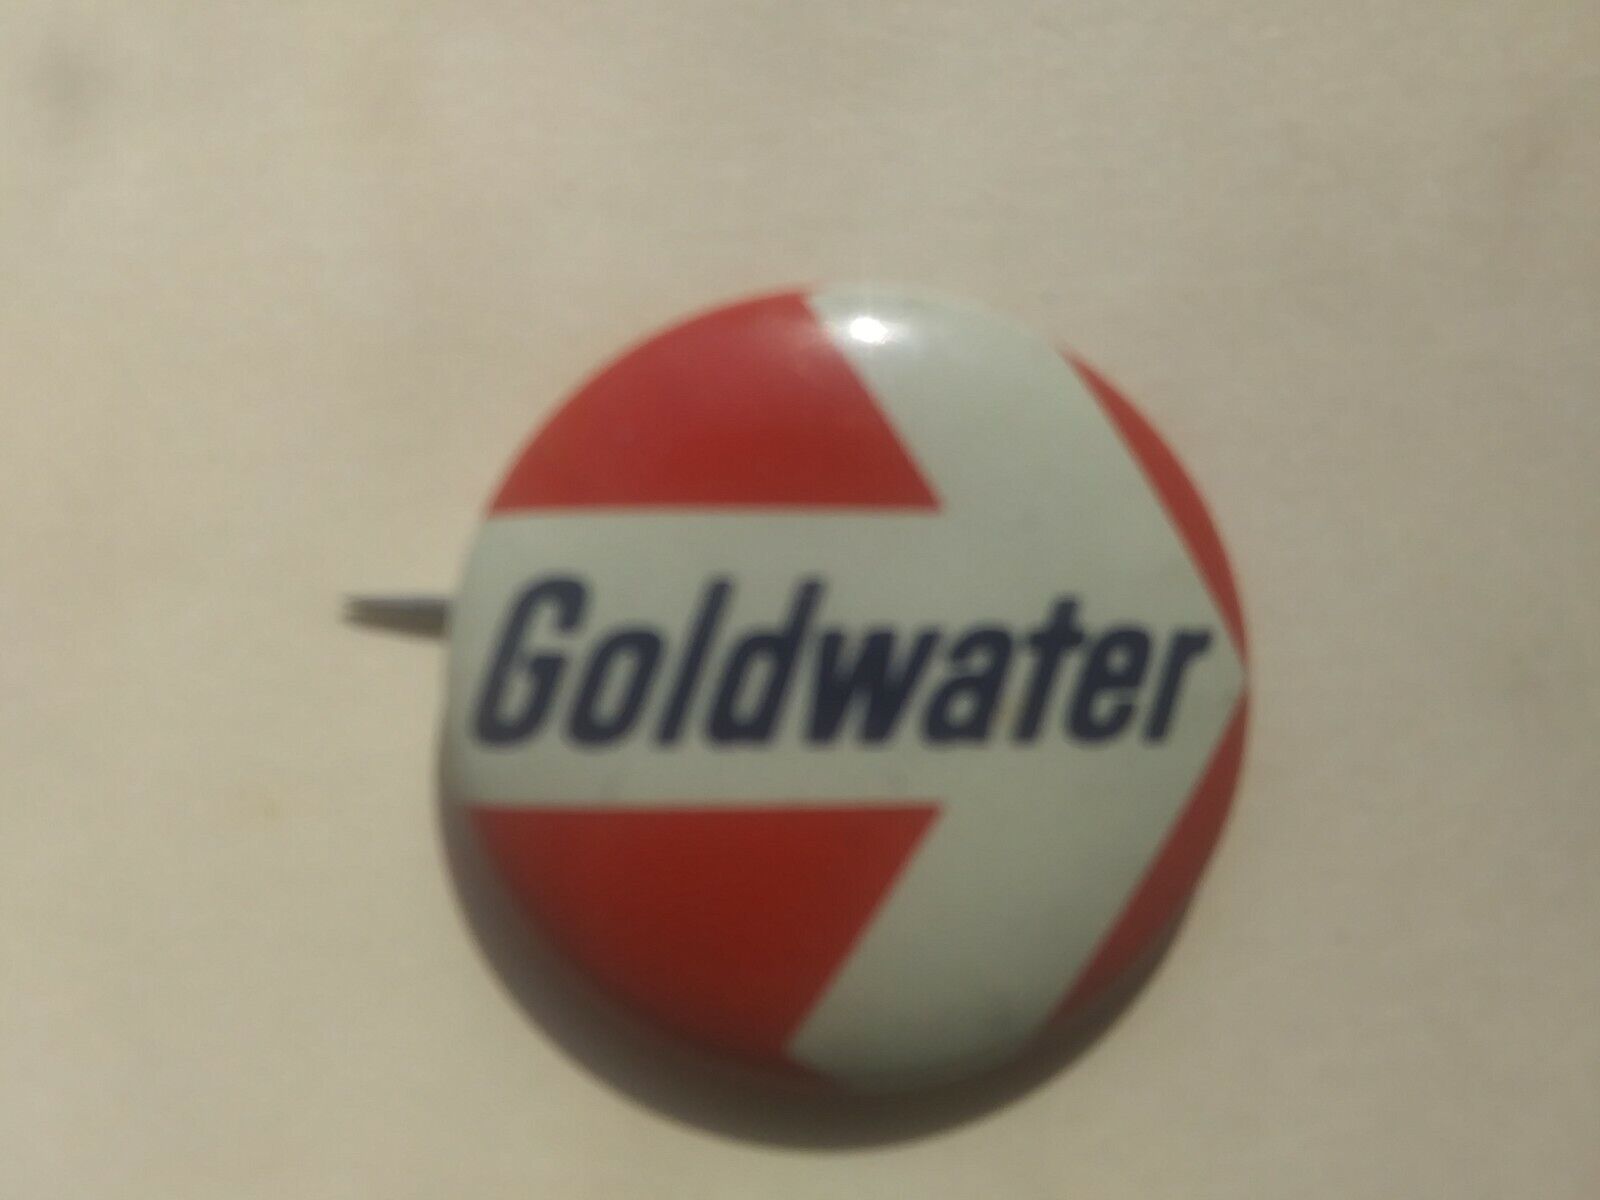 1964 Barry Goldwater Pin Back Campaign Button arrow presidential political